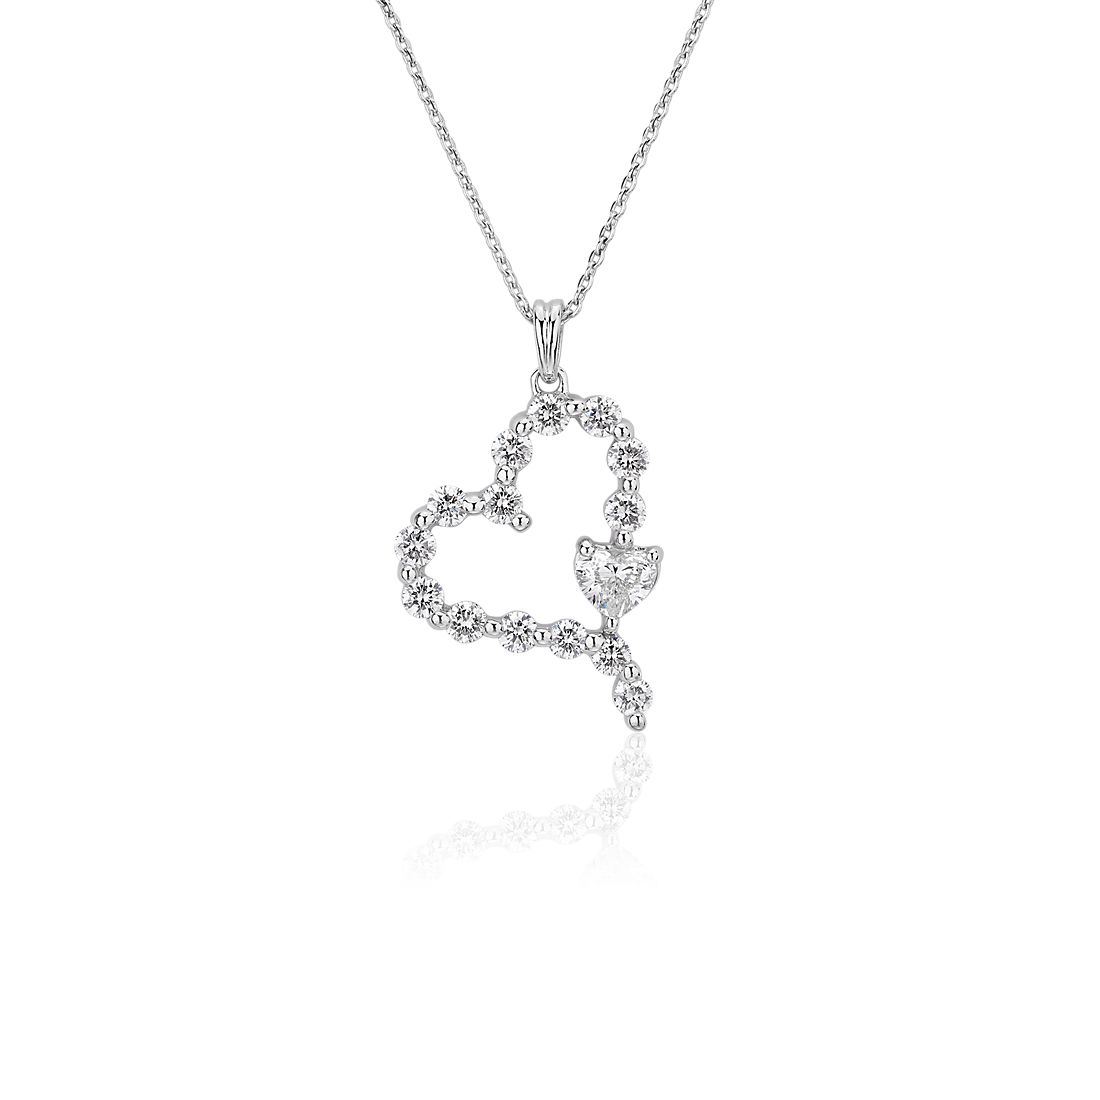 Floating Double Heart Pendant in 14k White Gold (0.57 ct. tw.)